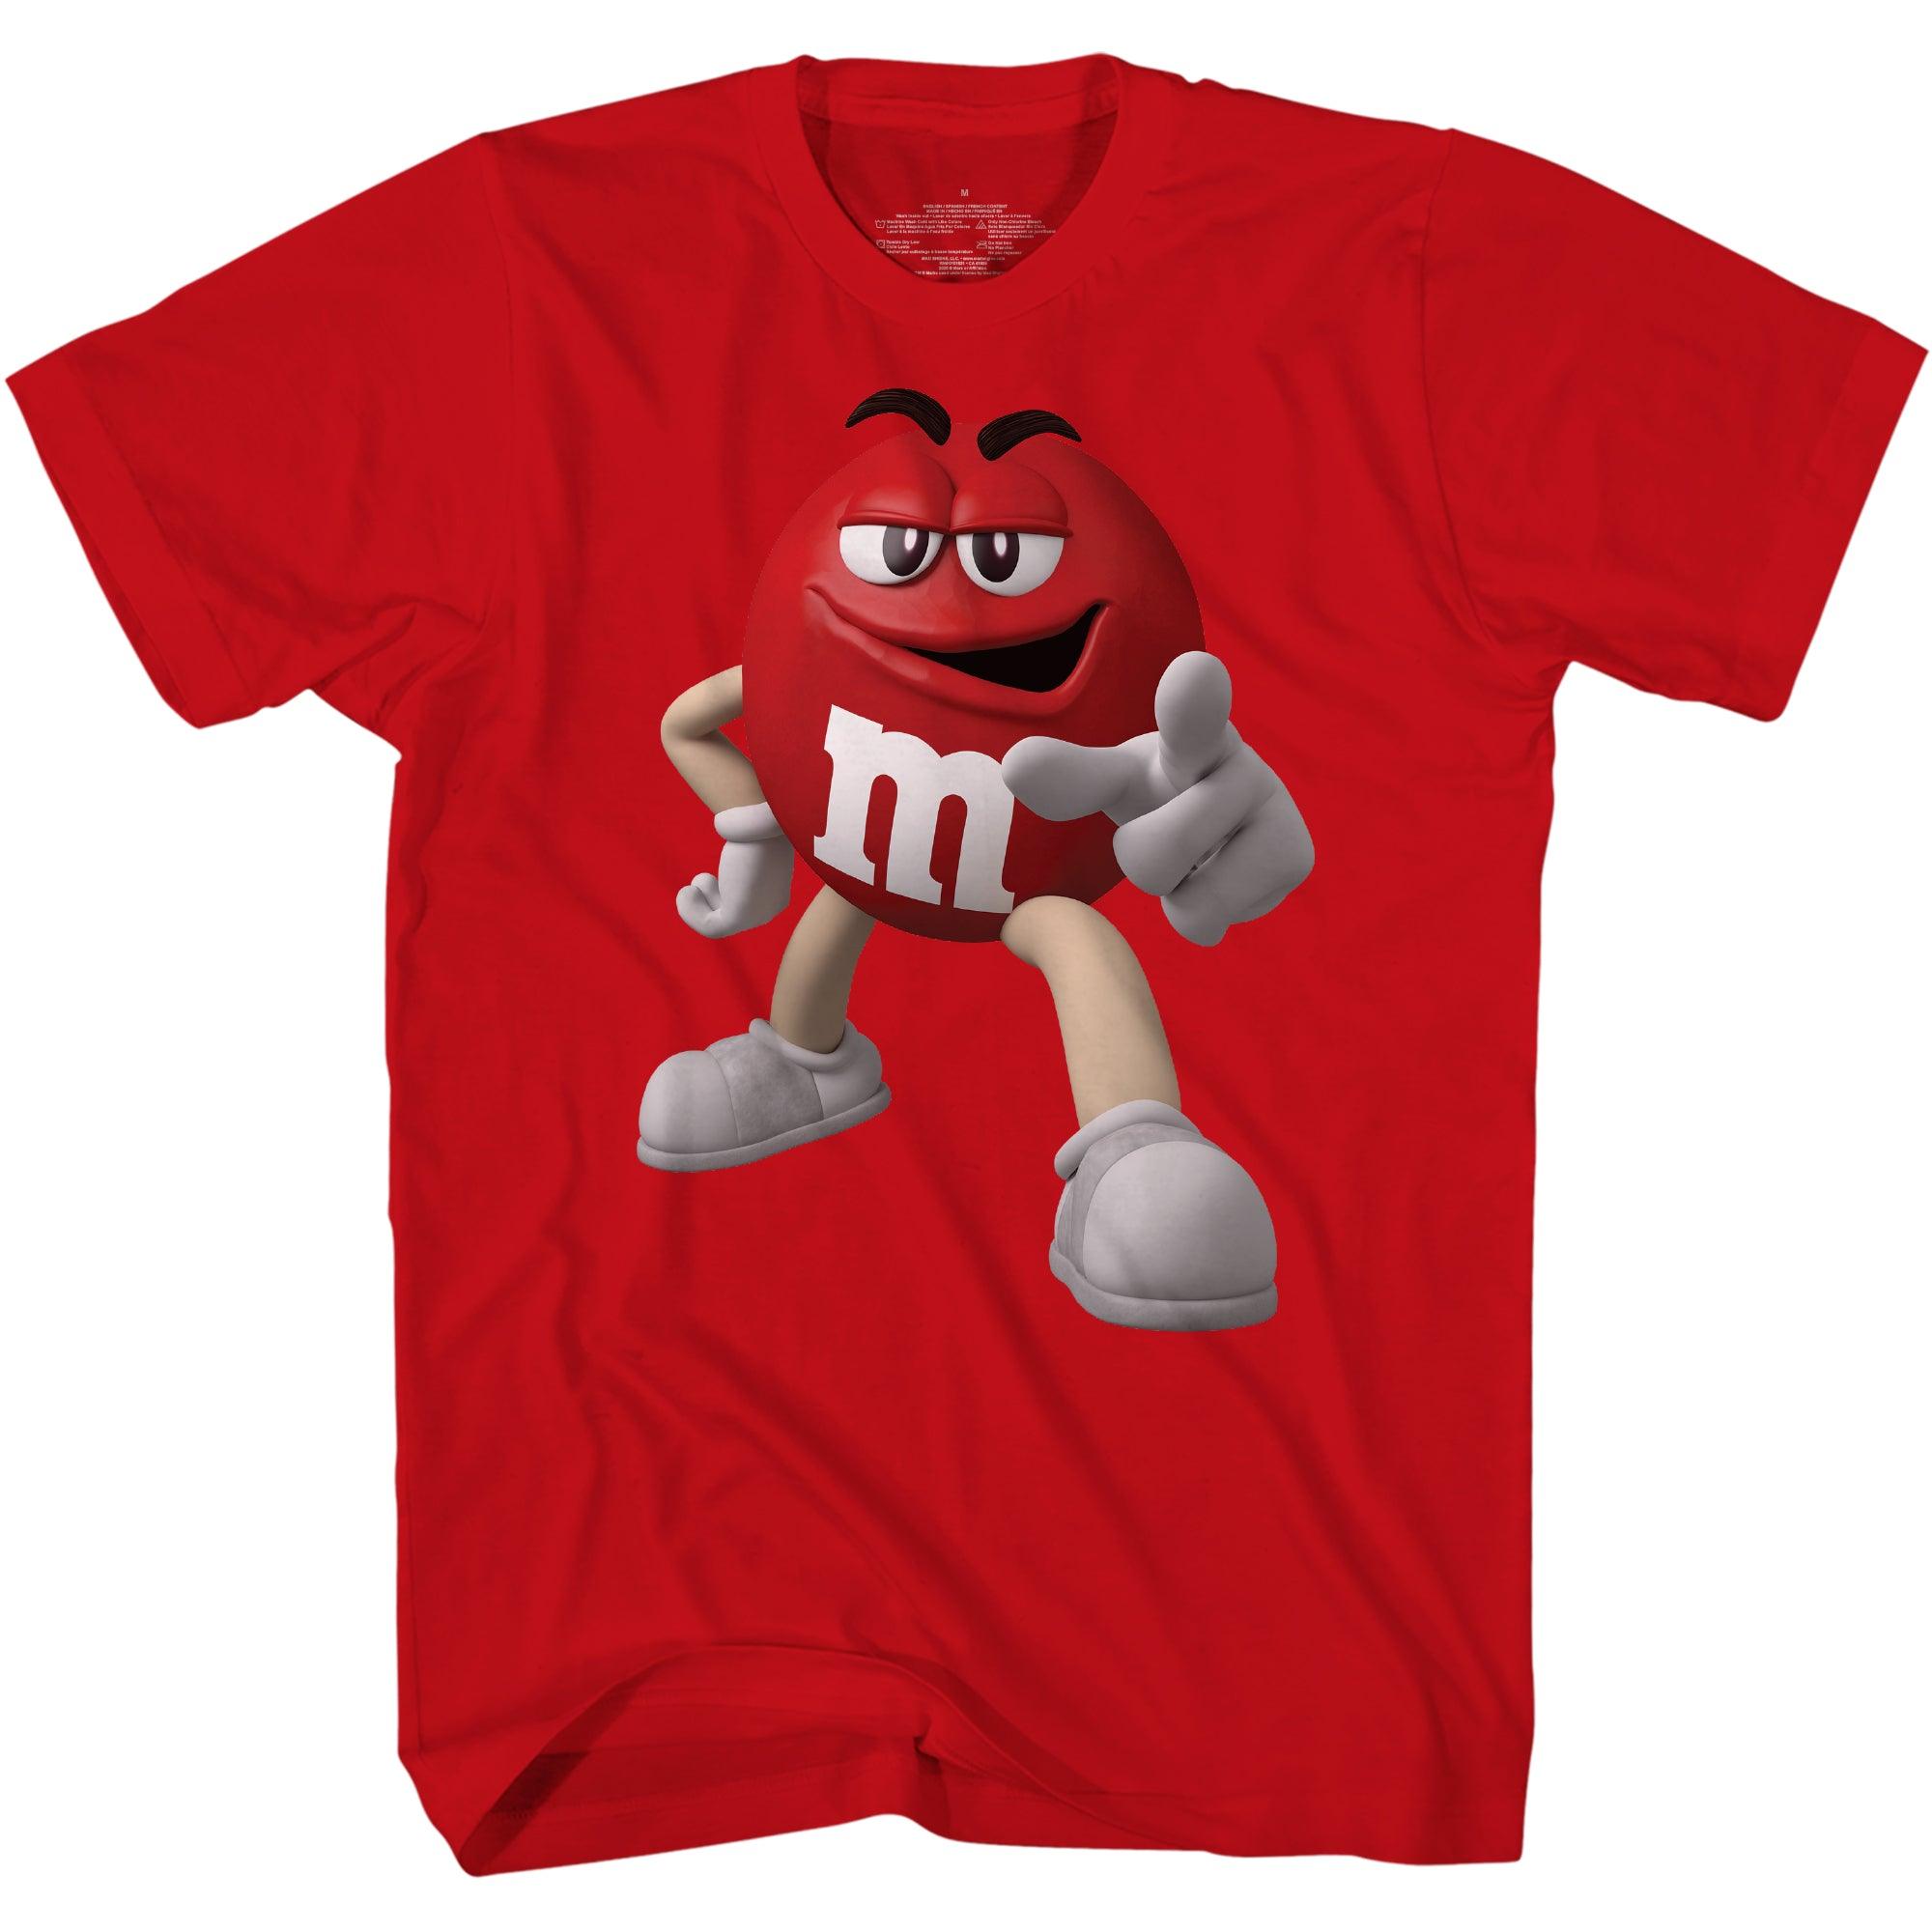 M&M's Candy Character Face Adult T-Shirt - S - Blue 